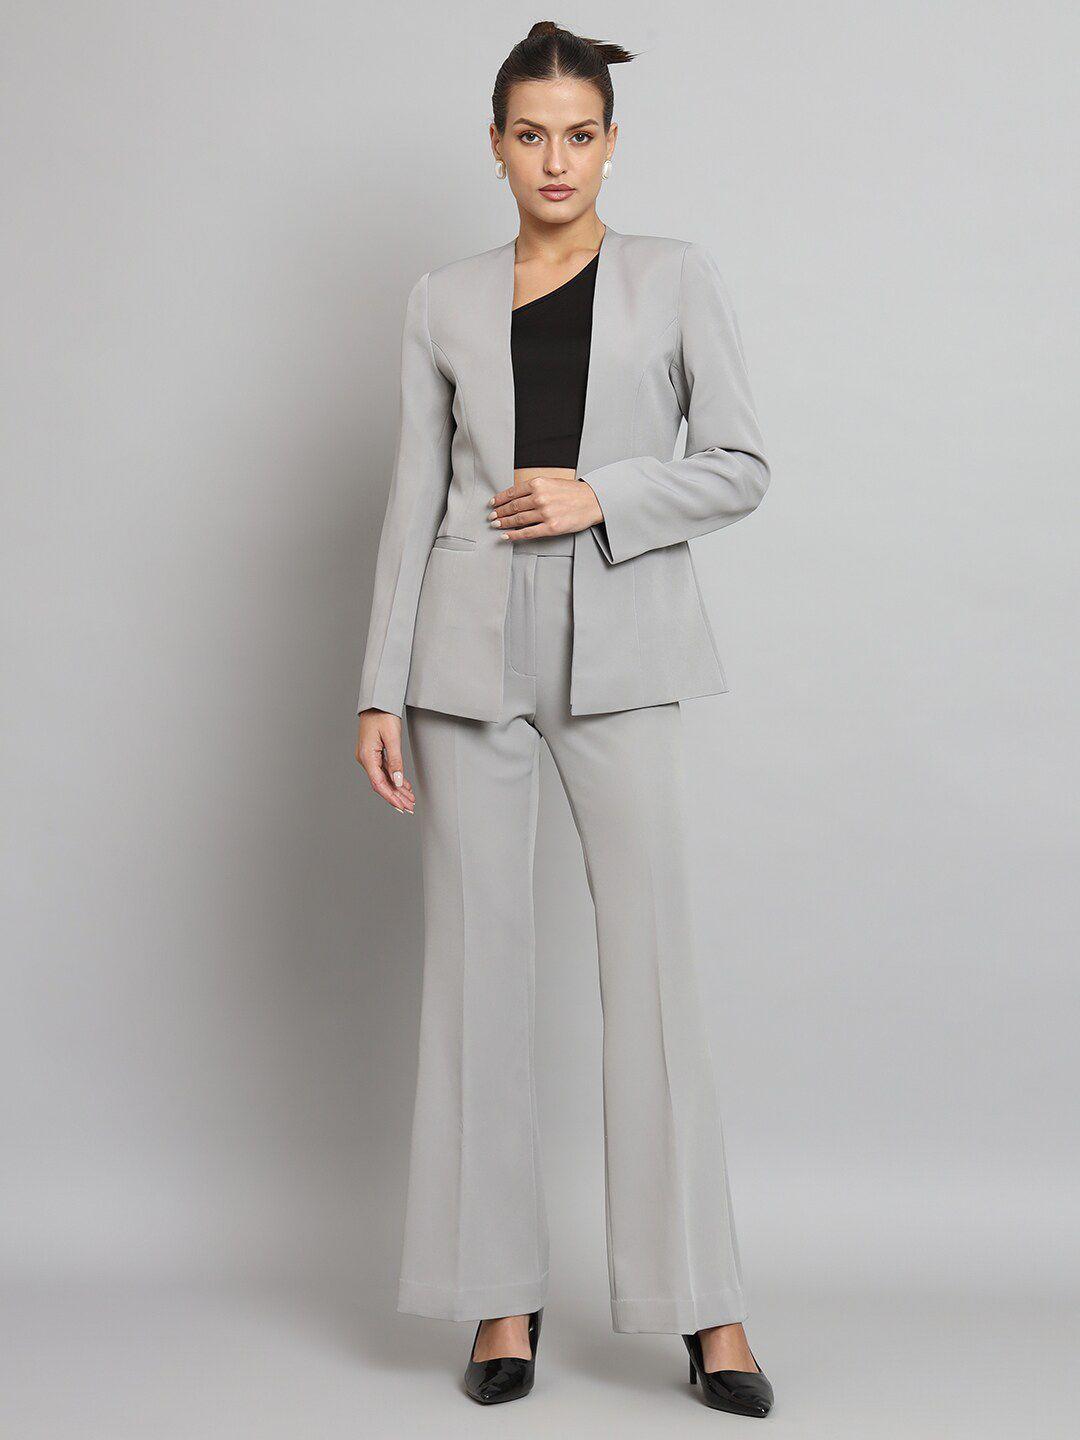 powersutra lapel less coat with trousers